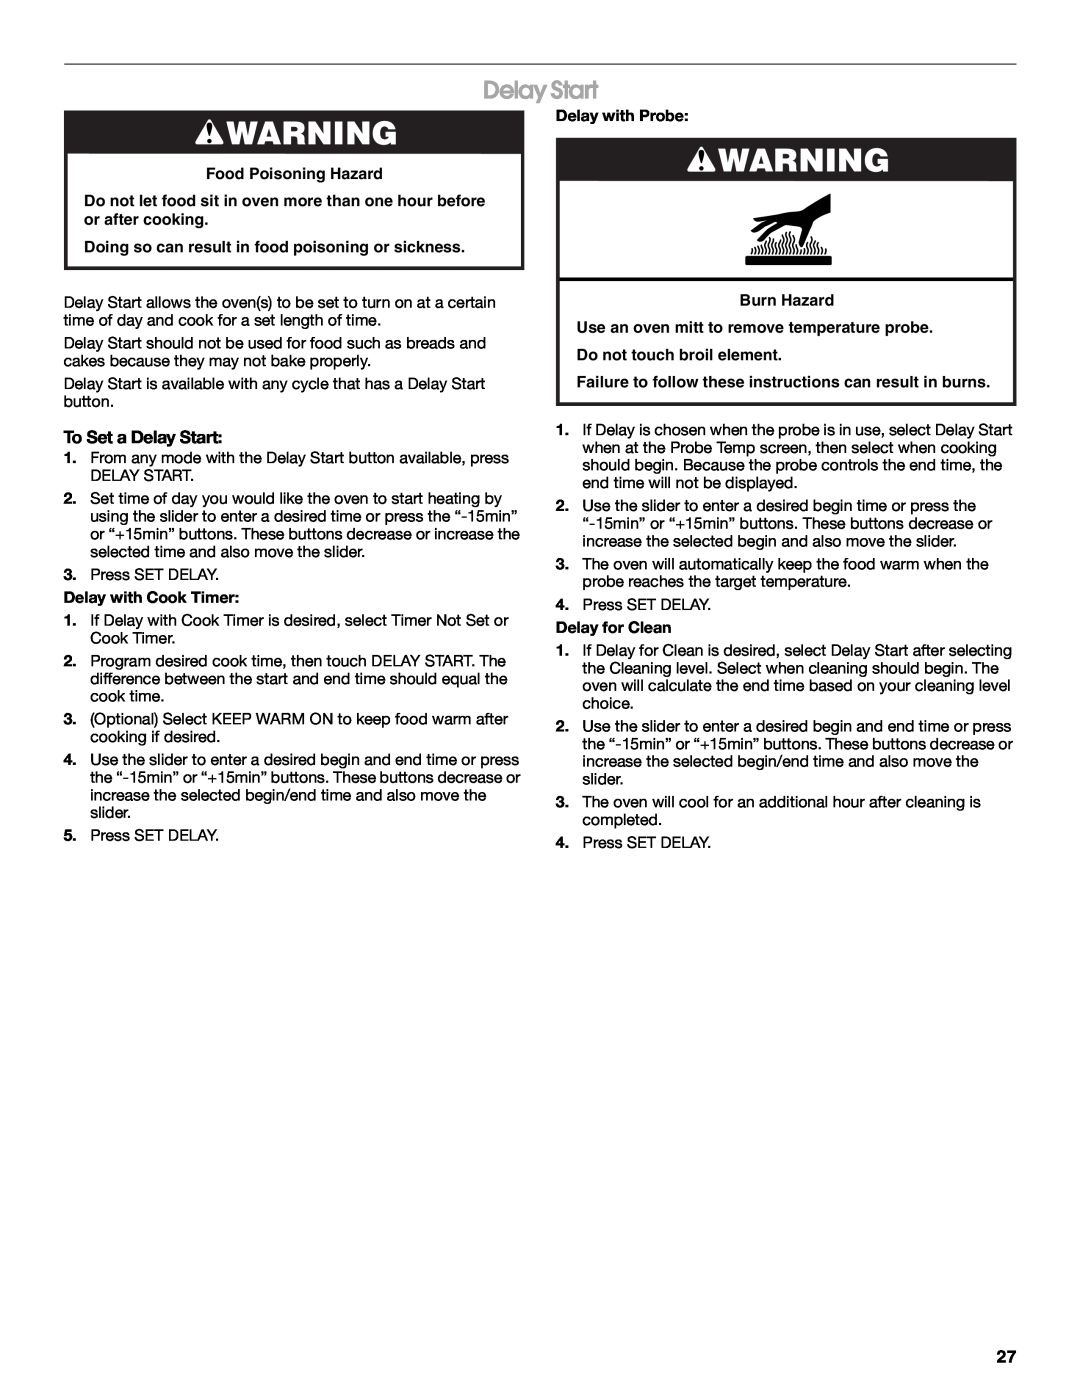 Jenn-Air JDRP430 manual To Set a Delay Start, Food Poisoning Hazard, Doing so can result in food poisoning or sickness 